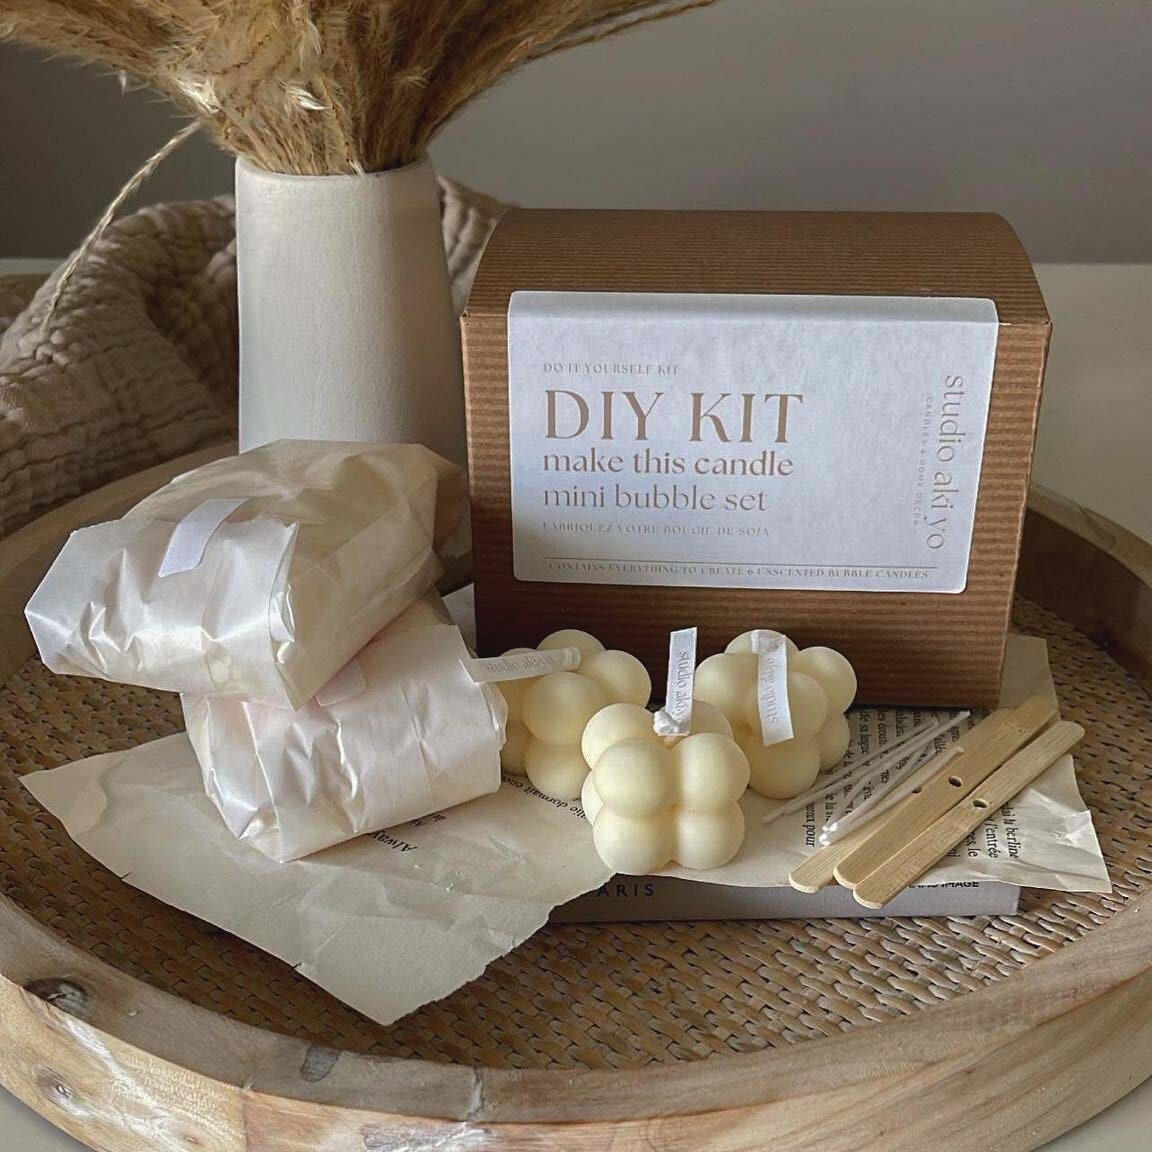 DIY Kit: Scented Wood Wick Candle Making Kit Scented Candle Making Kit DIY  Gift Box Adult Craft Kit Fun Activity Unique Craft Gift 